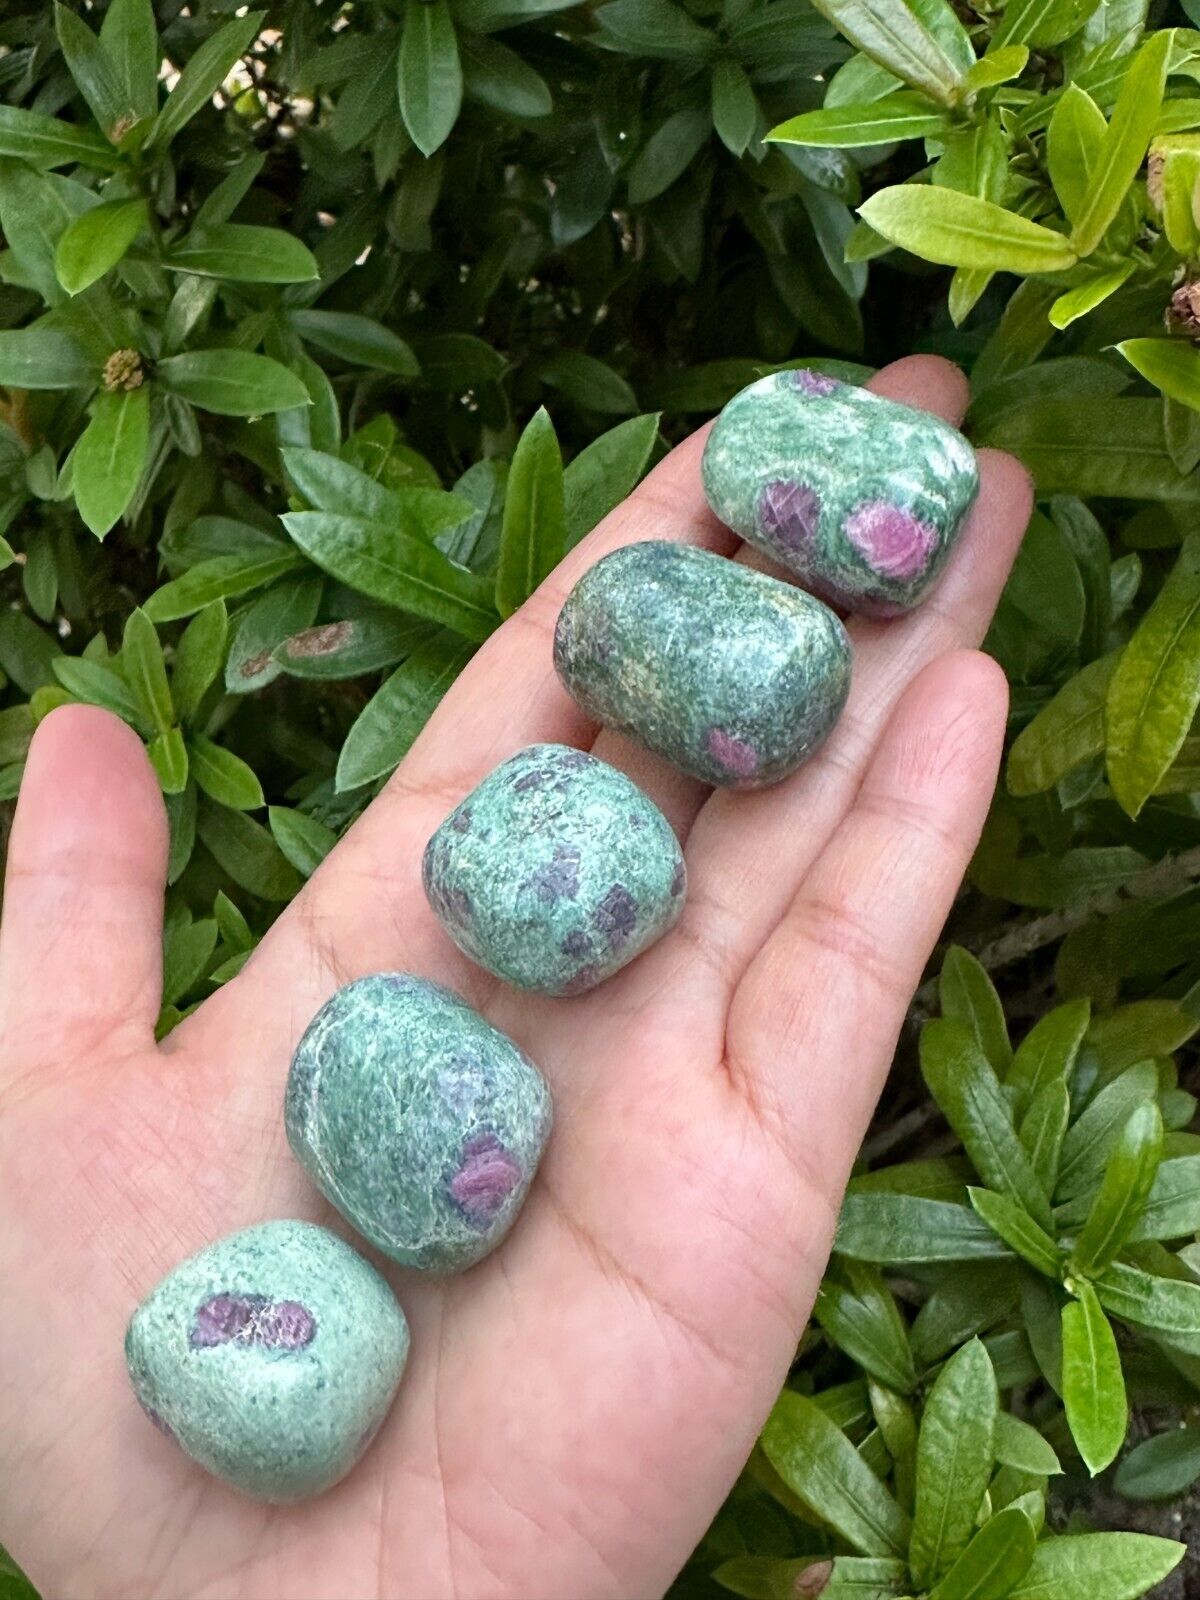 Grade A++ Ruby Fuchsite Tumbled Stones 0.75-1.25 Inch, Pick How Many